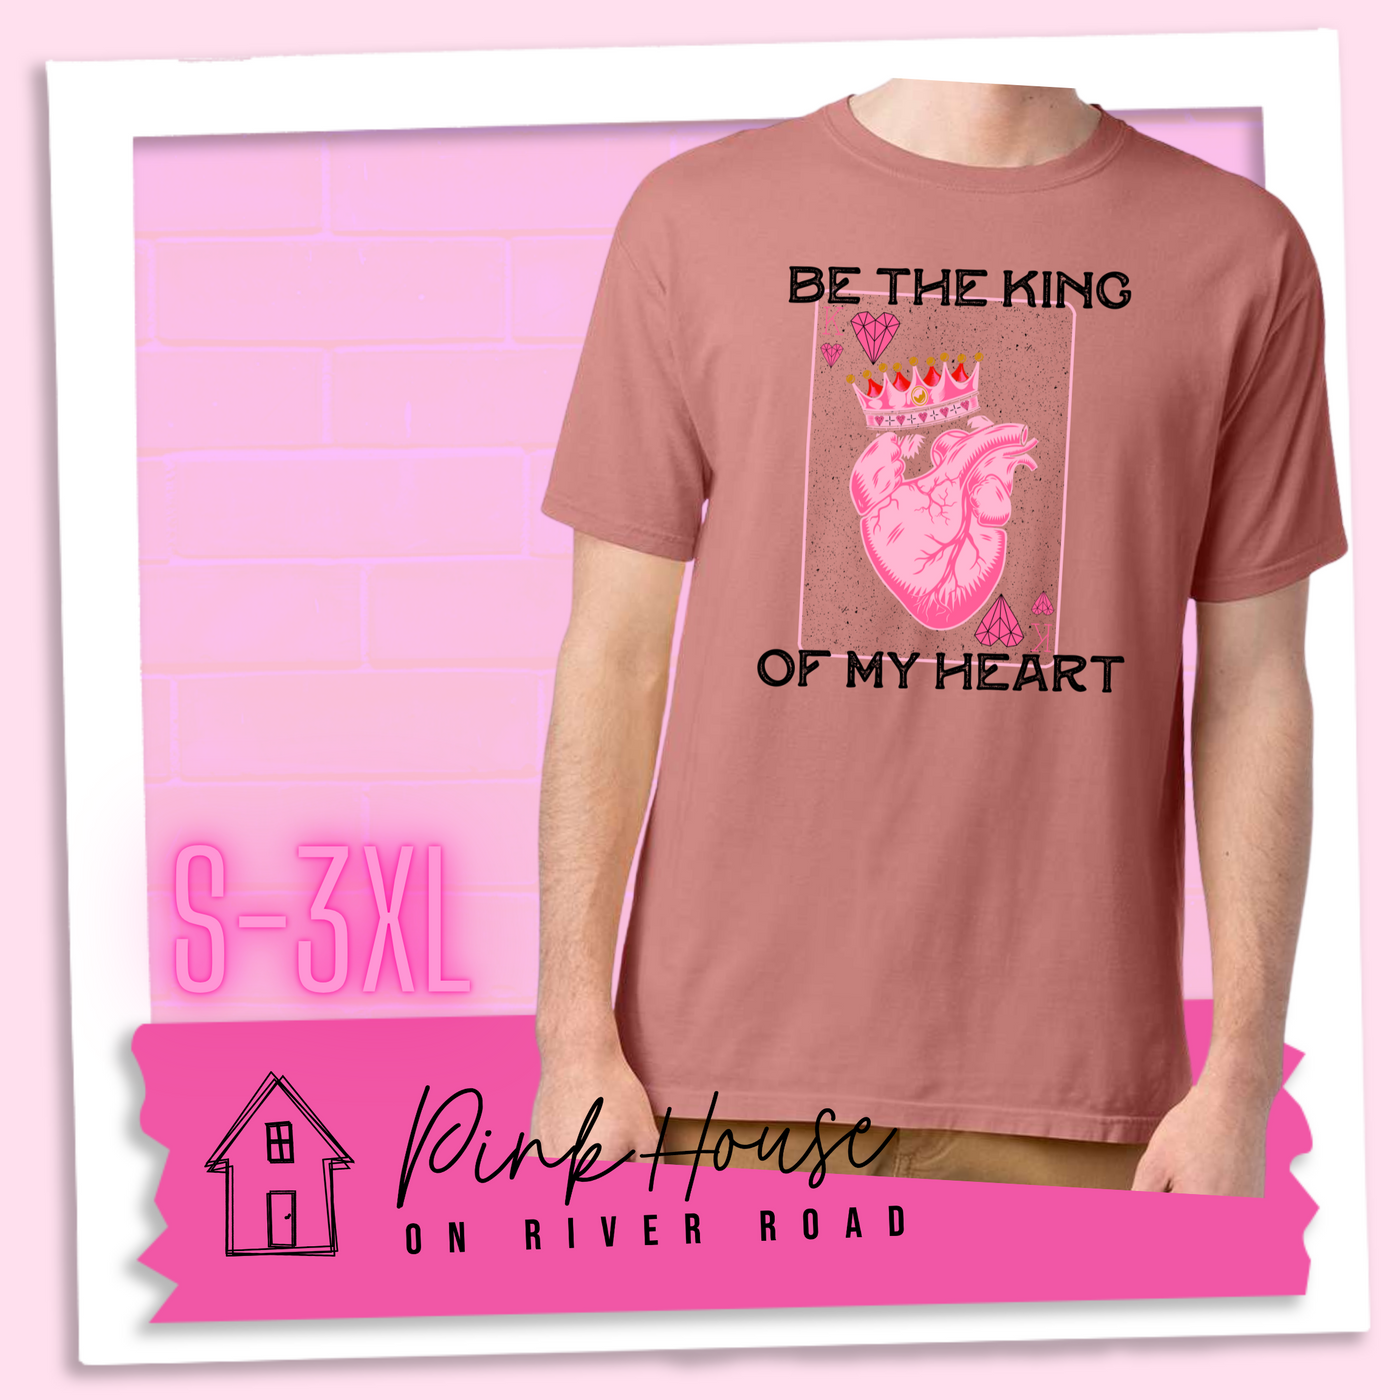 Mauve Tee with a graphic that says "Be The King Of My Heart" in Black writing with a vintage effect. There is a King PLaying card with a speckled background, geometric hearts in the corners with the K and a realistic heart with a crown on it in the middle of the playing card.